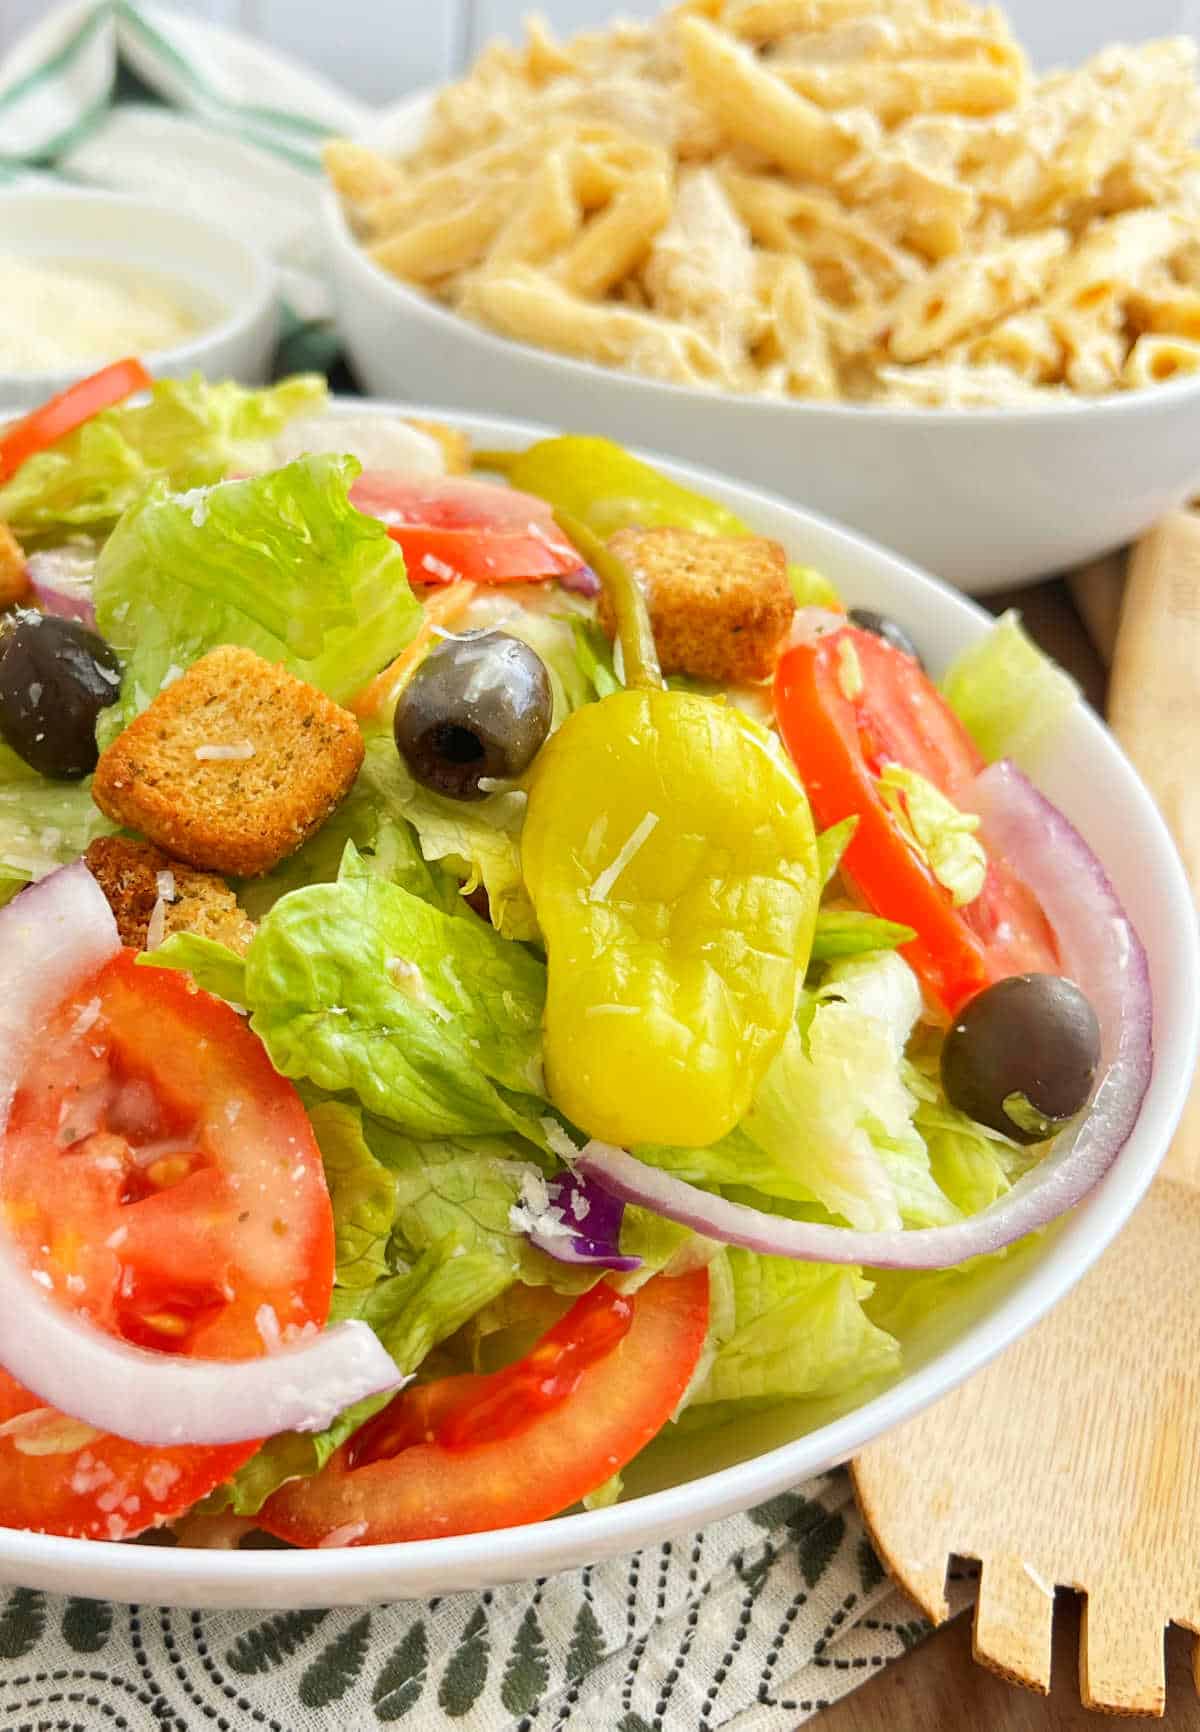 serving bowl of salad like olive garden makes with pasta.